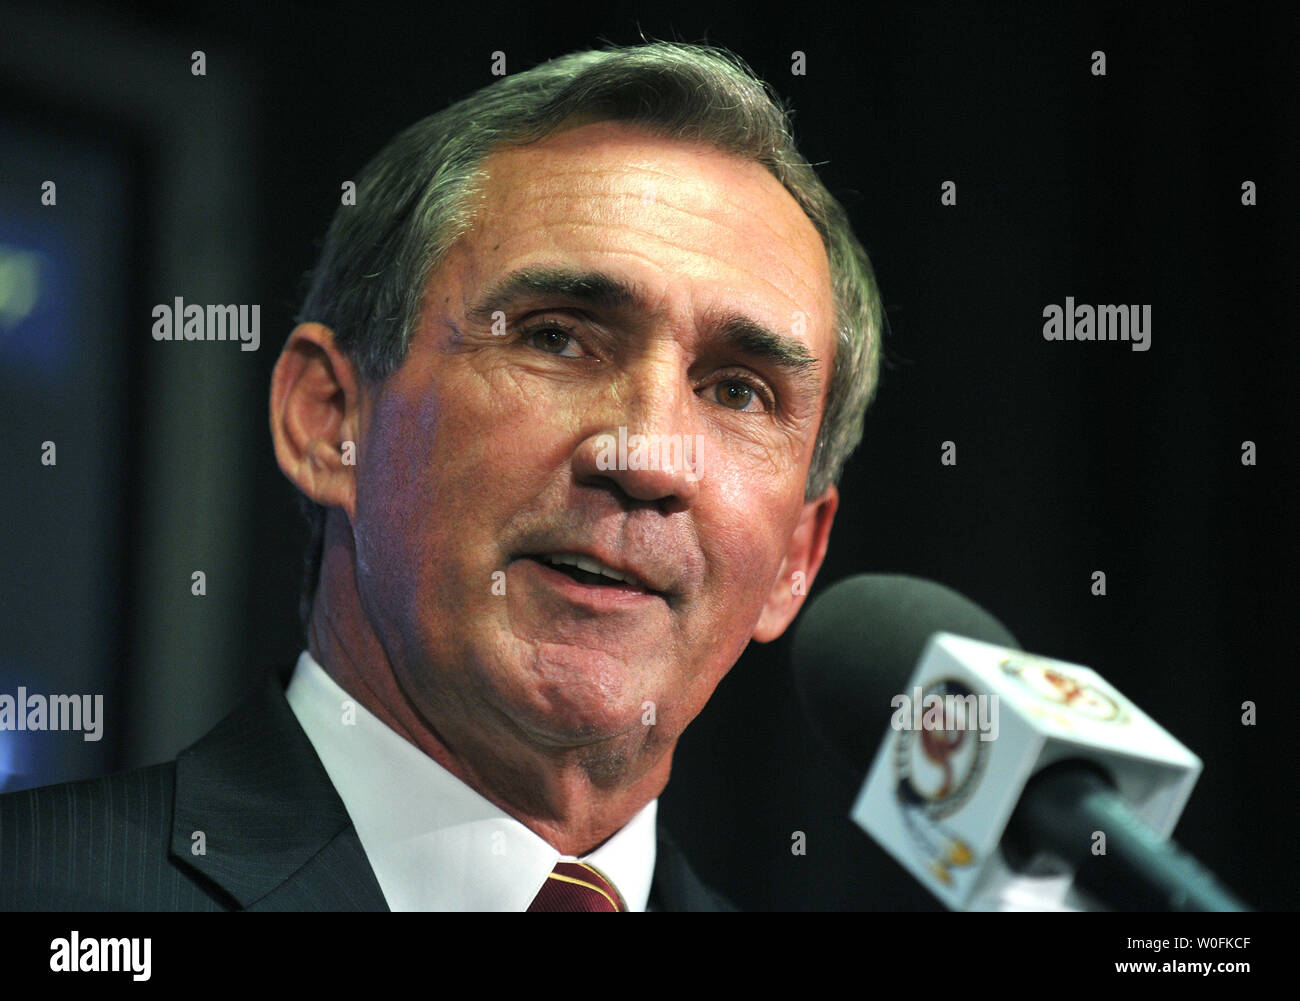 Washington Redskins head coach Mike Shanahan speaks as he introduces Redskins new quarterback Donovan McNabb, at a press conference at Redskins Park in Ashburn, Virginia on April 6, 2010. The Philadelphia Eagles traded McNabb to the Washington Redskins for a pair of draft picks in the upcoming NFL draft. UPI/Kevin Dietsch Stock Photo